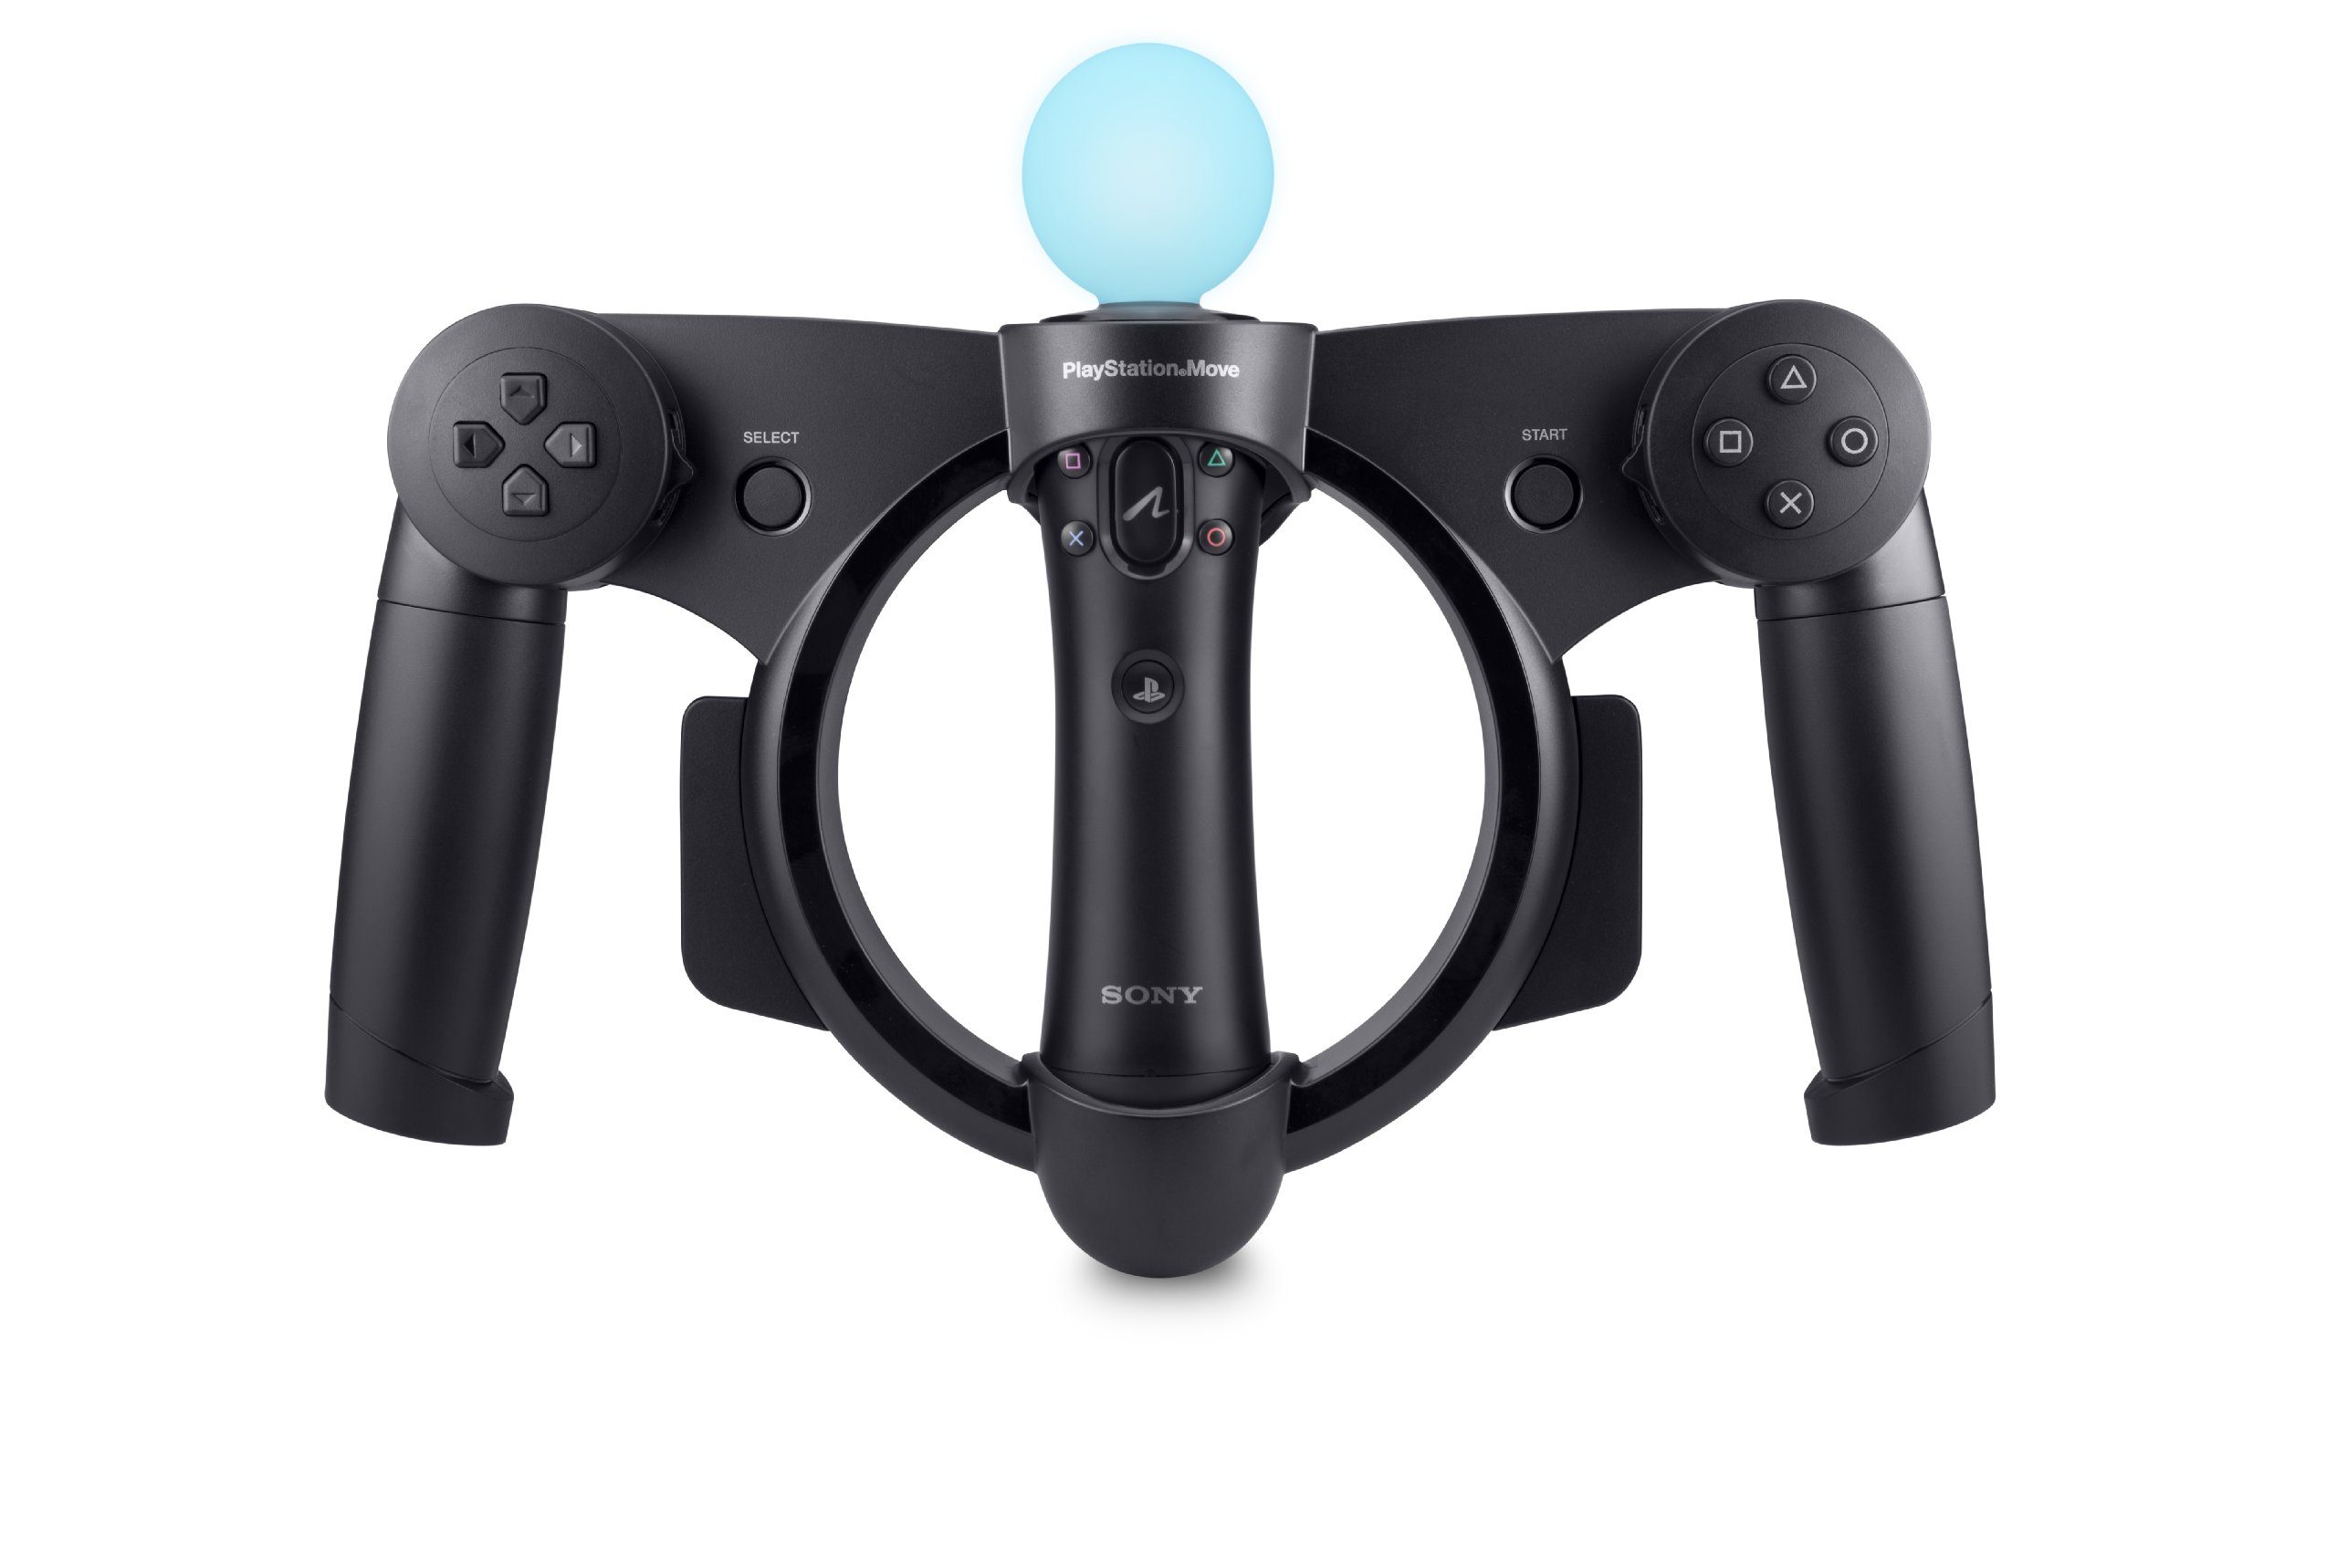 How To Connect Playstation Move Racing Wheel